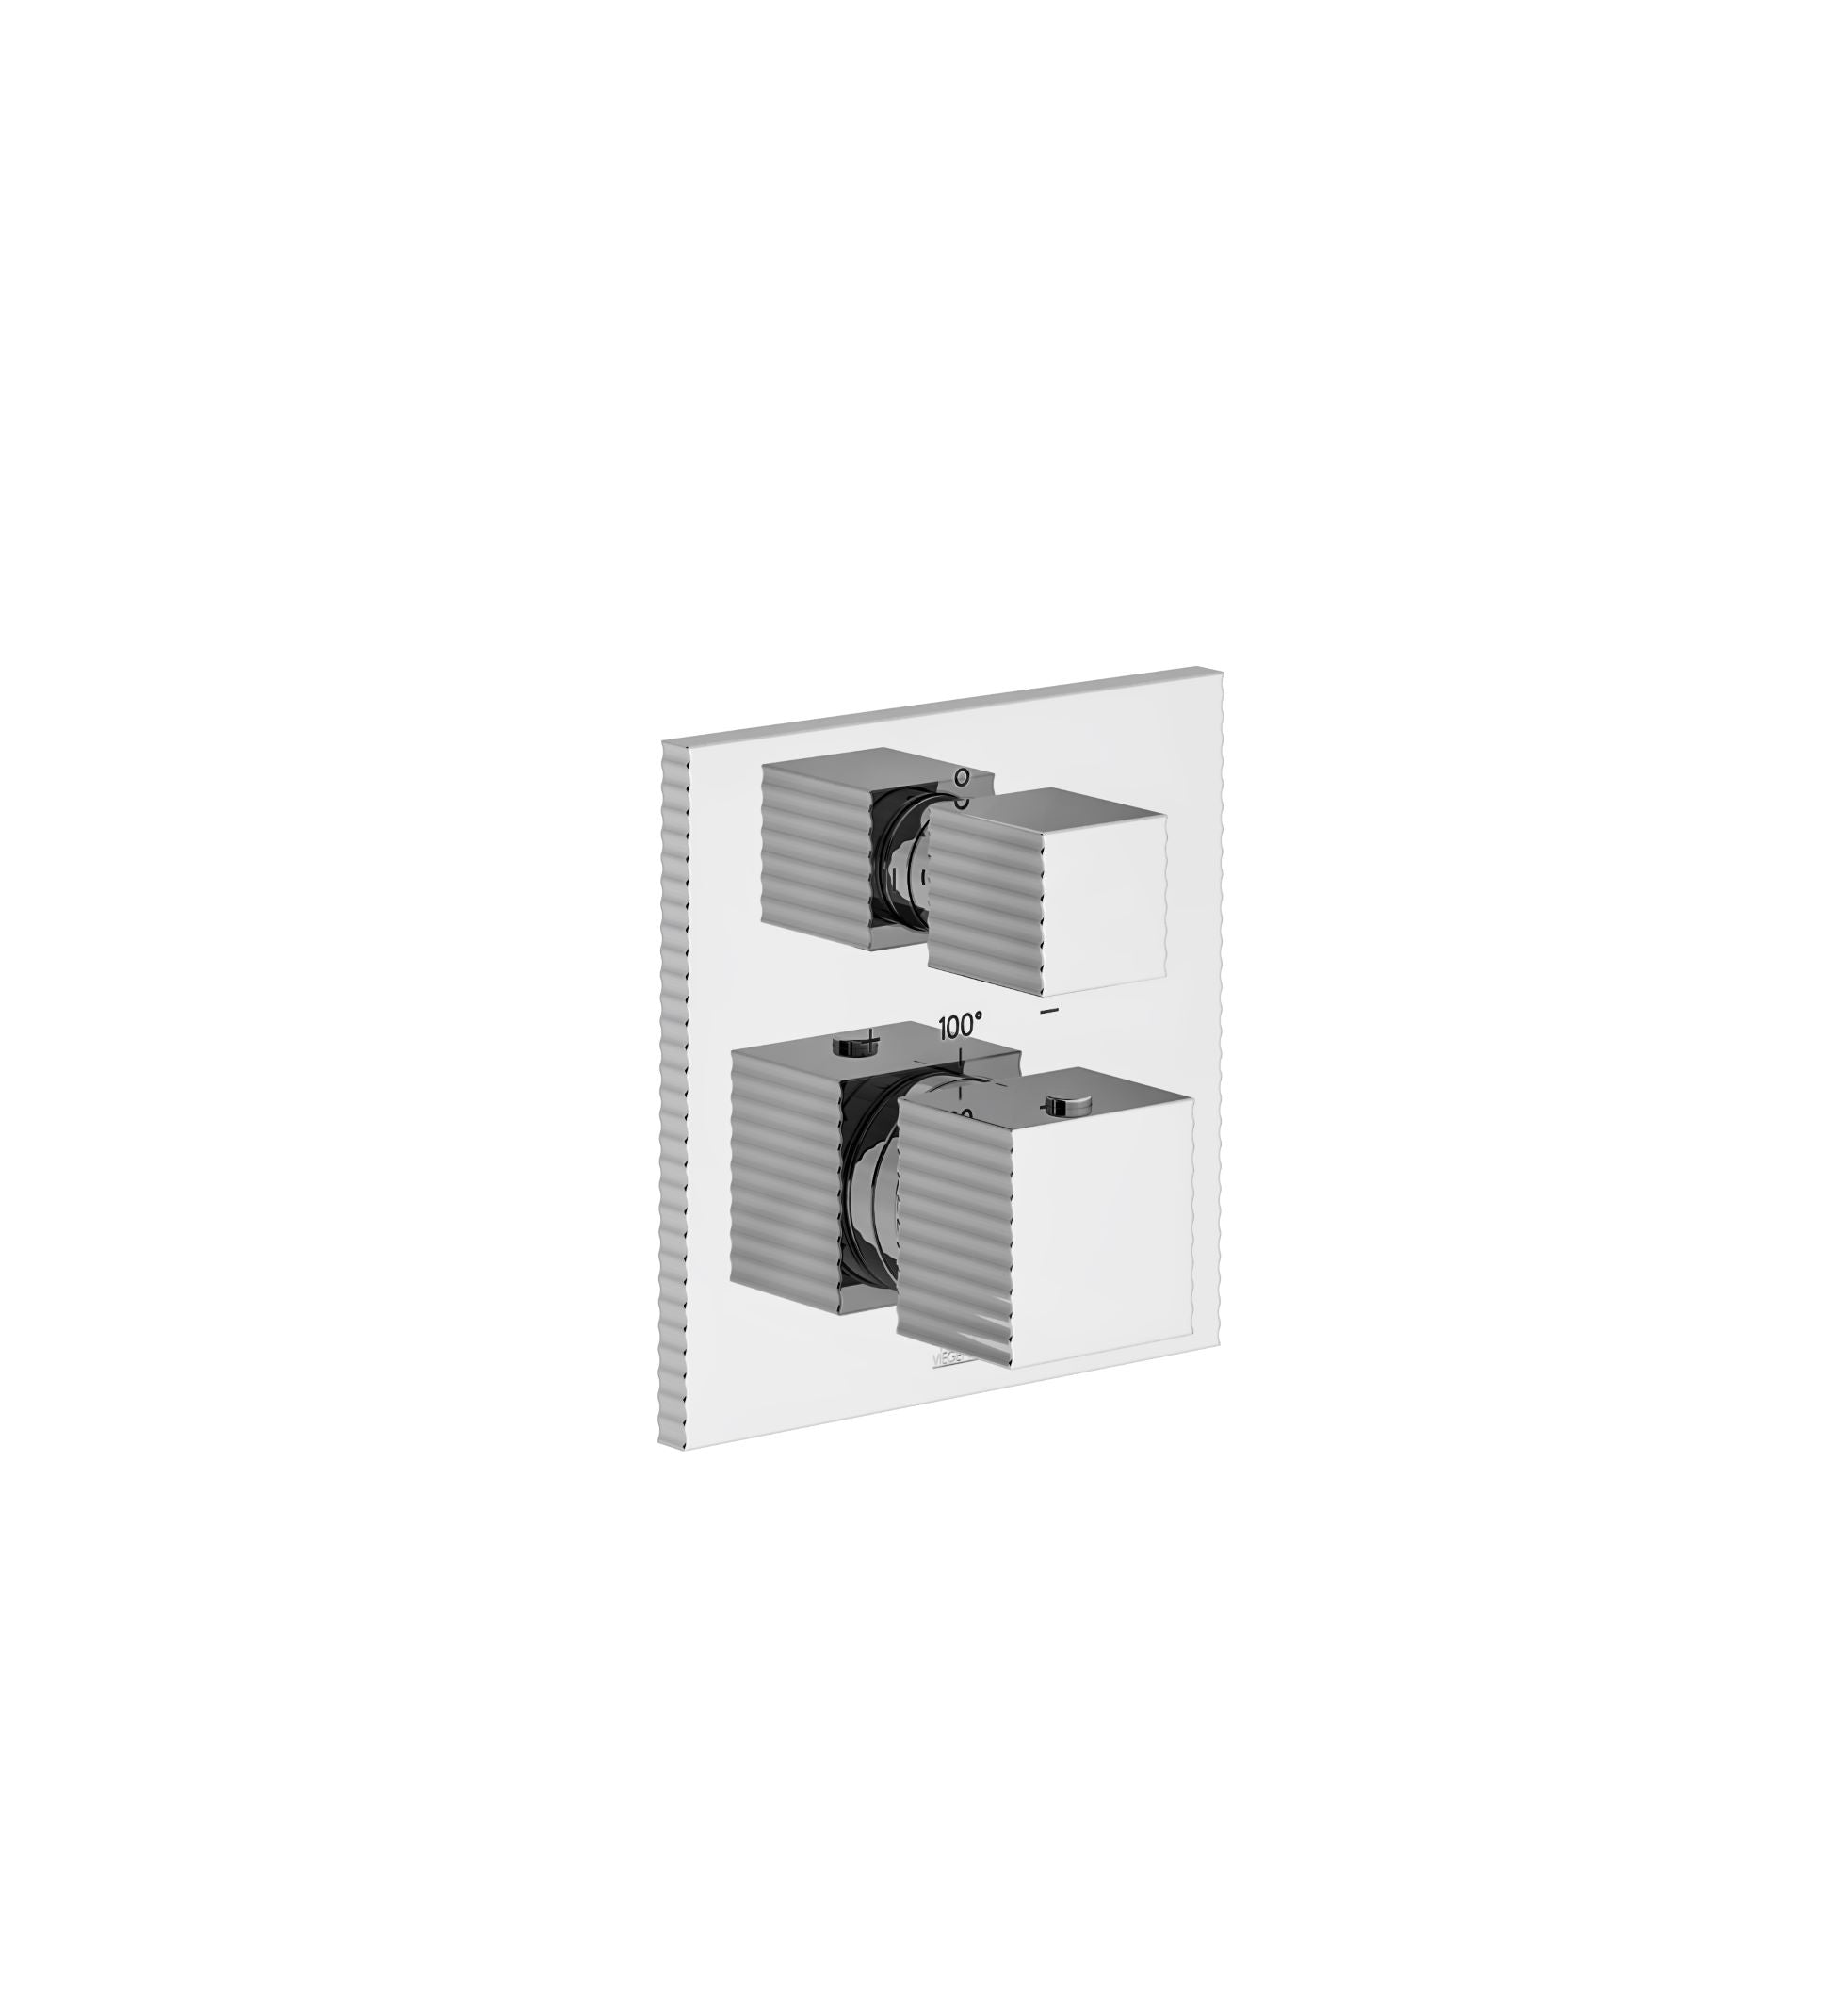 Groovy Universal square thermostatic wall valve - Trim only